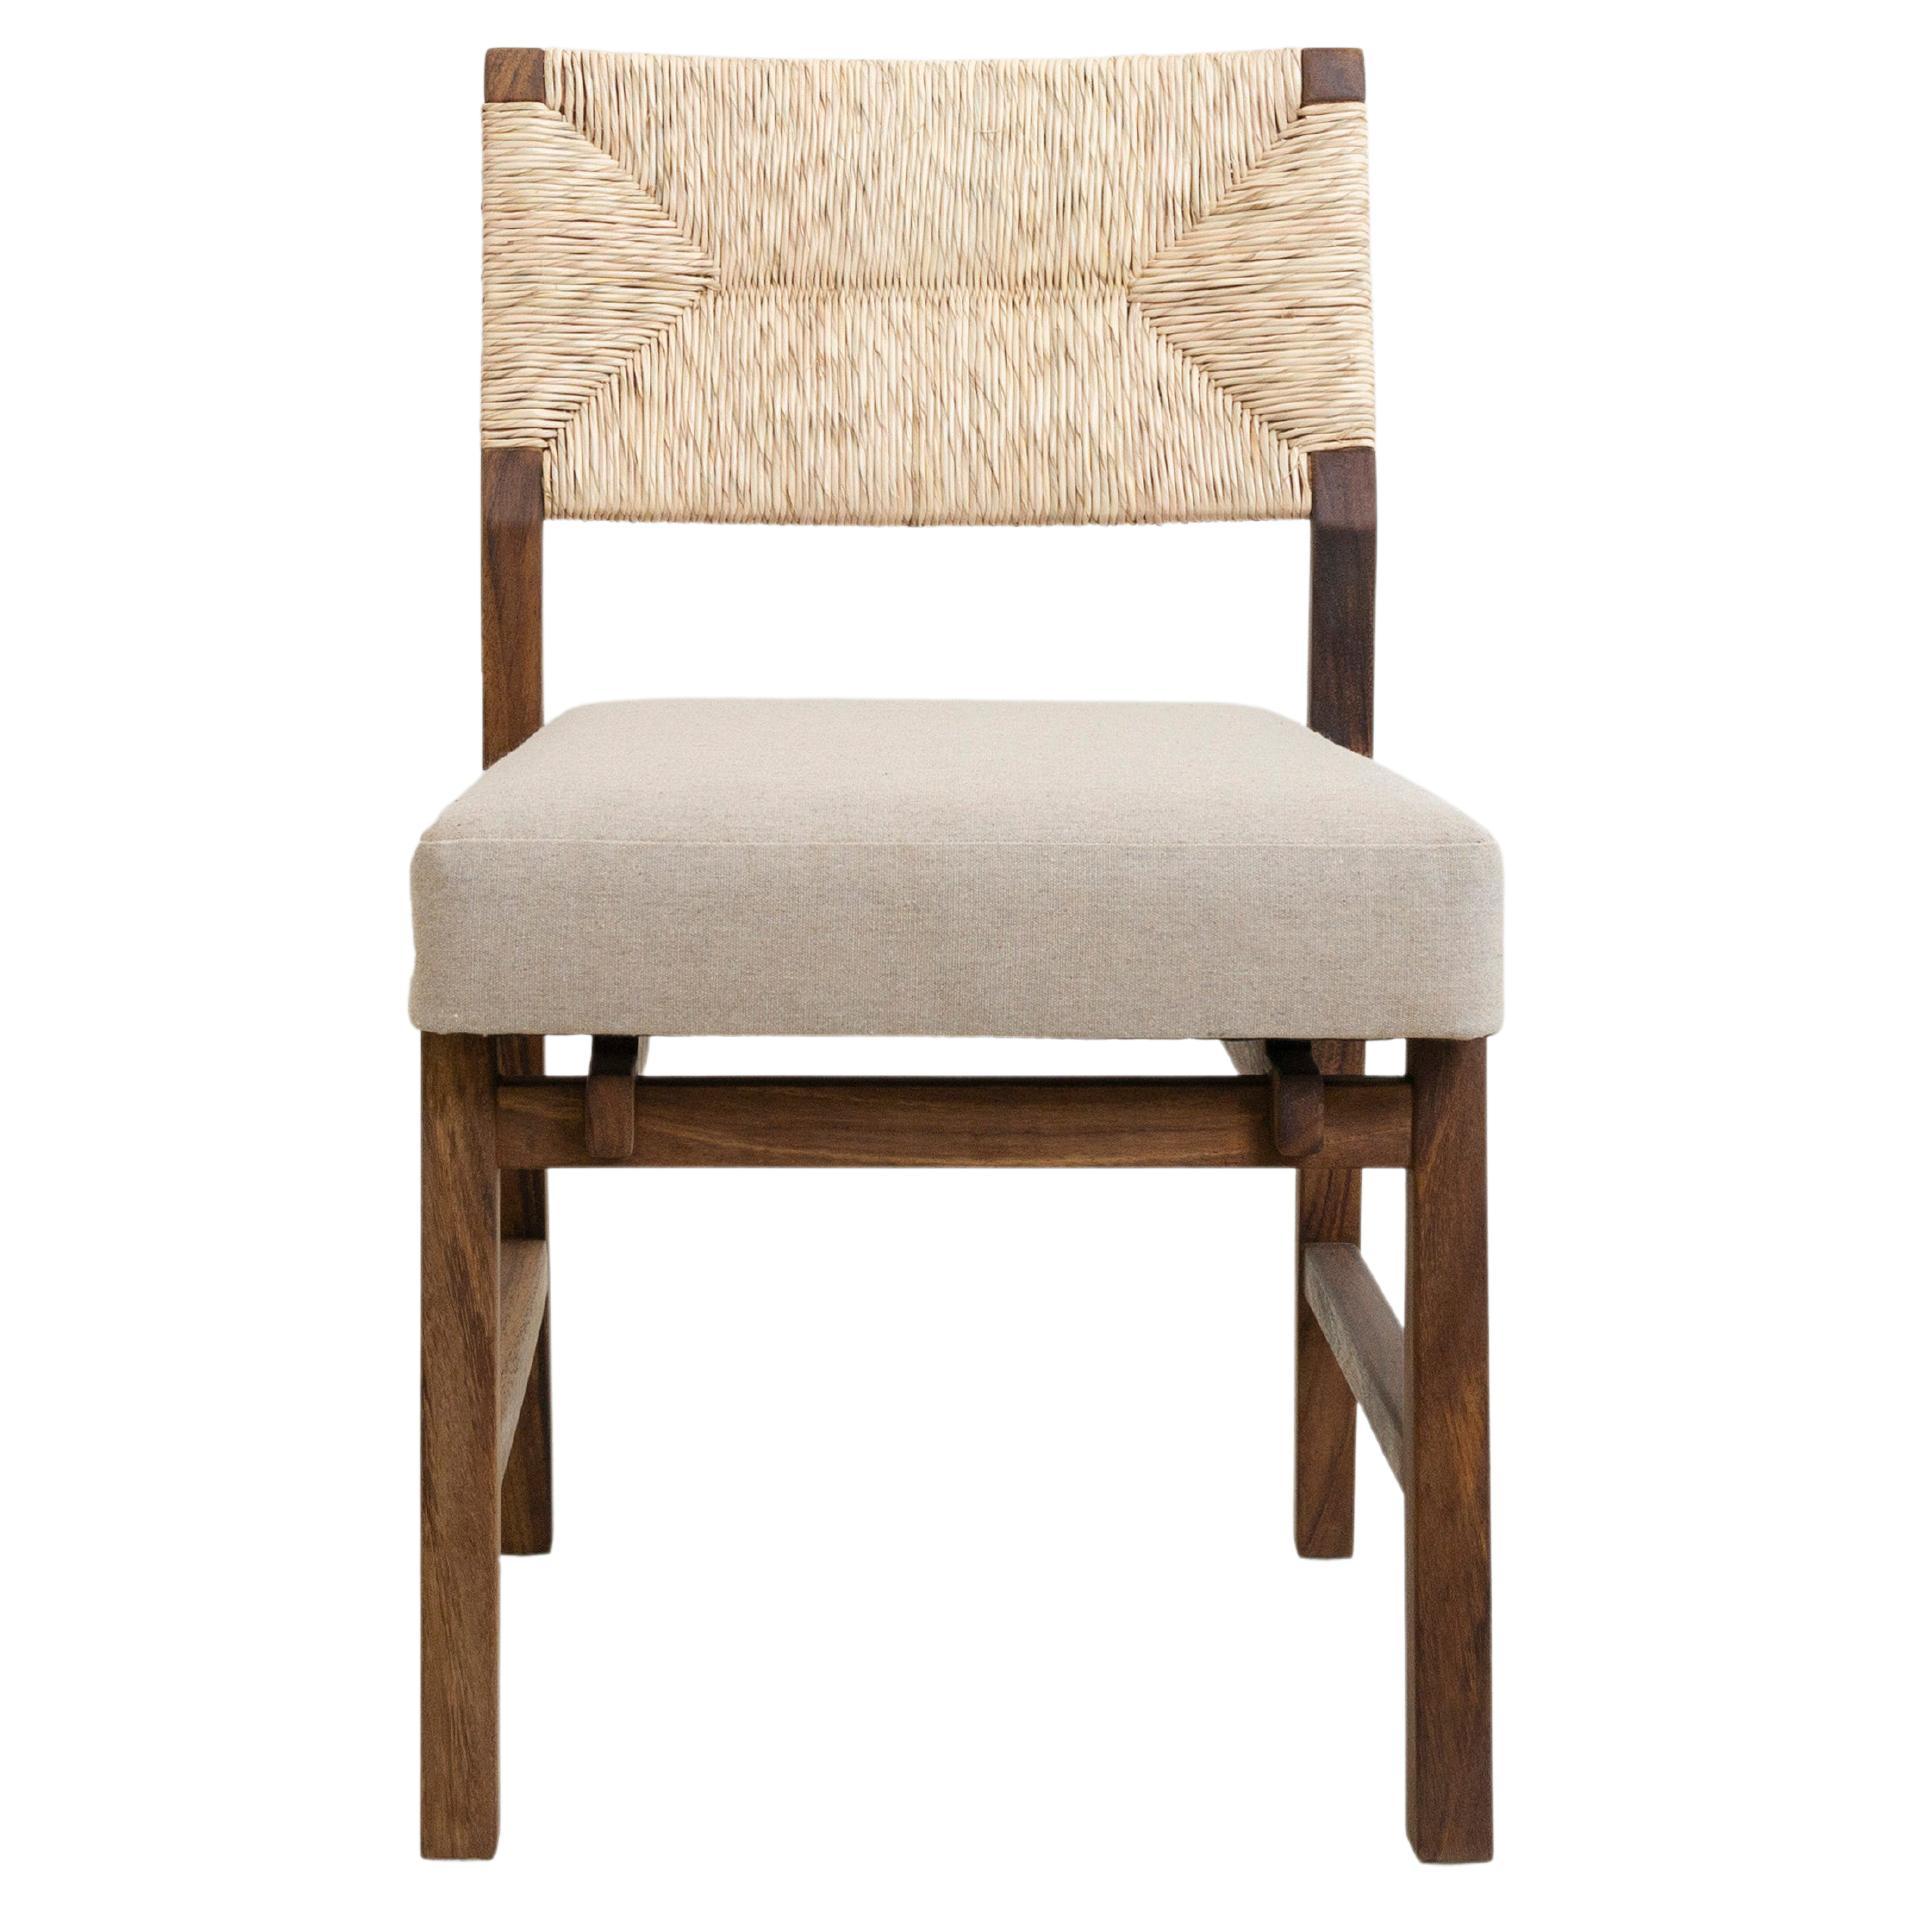 Lago Dining Chair with Natural Palm Fiber Back, Contemporary Mexican Design